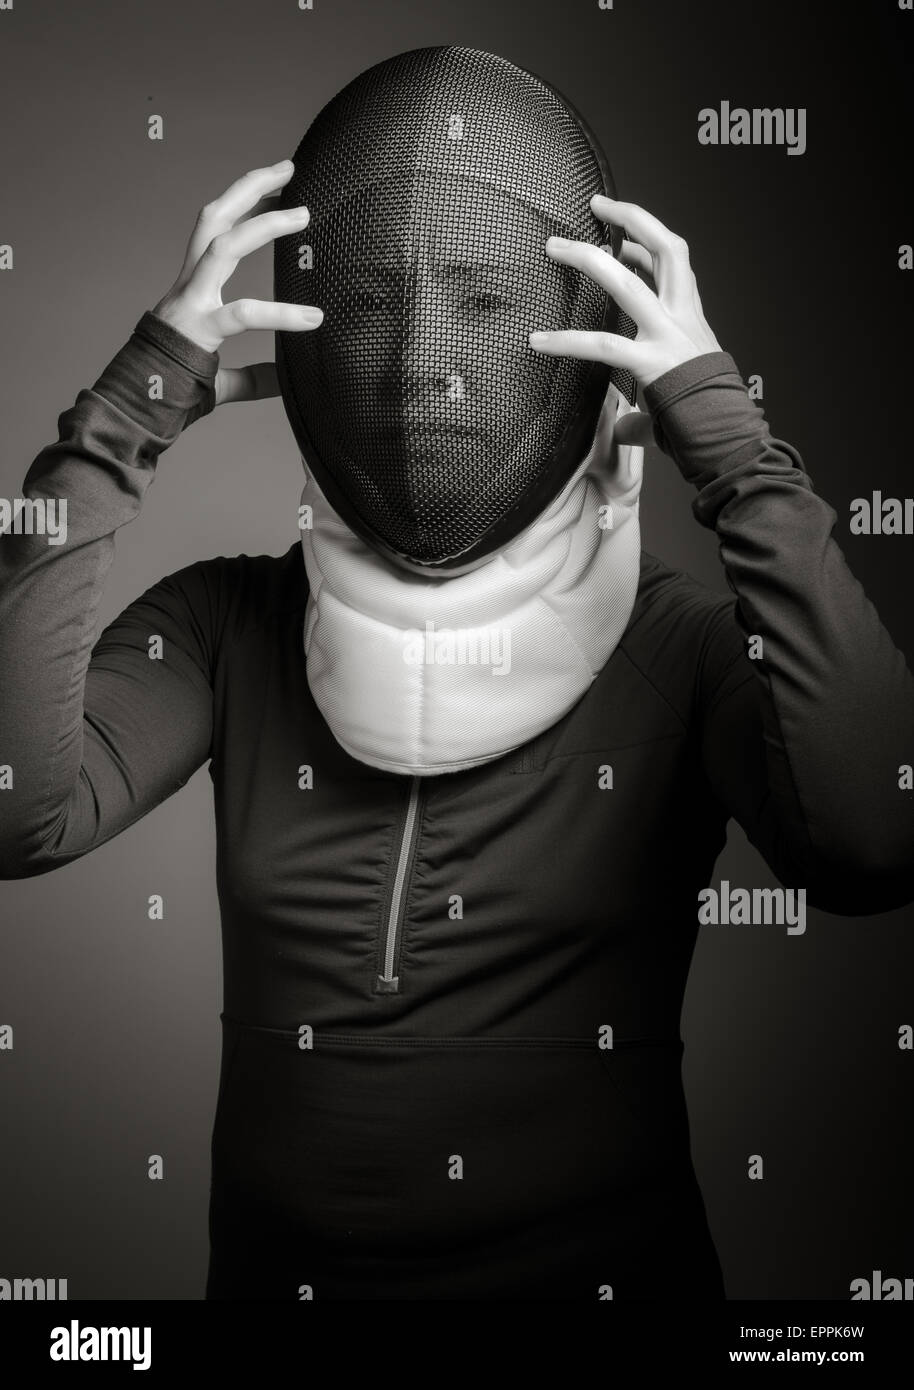 Female fencer in fencing mask looking frustrated Stock Photo